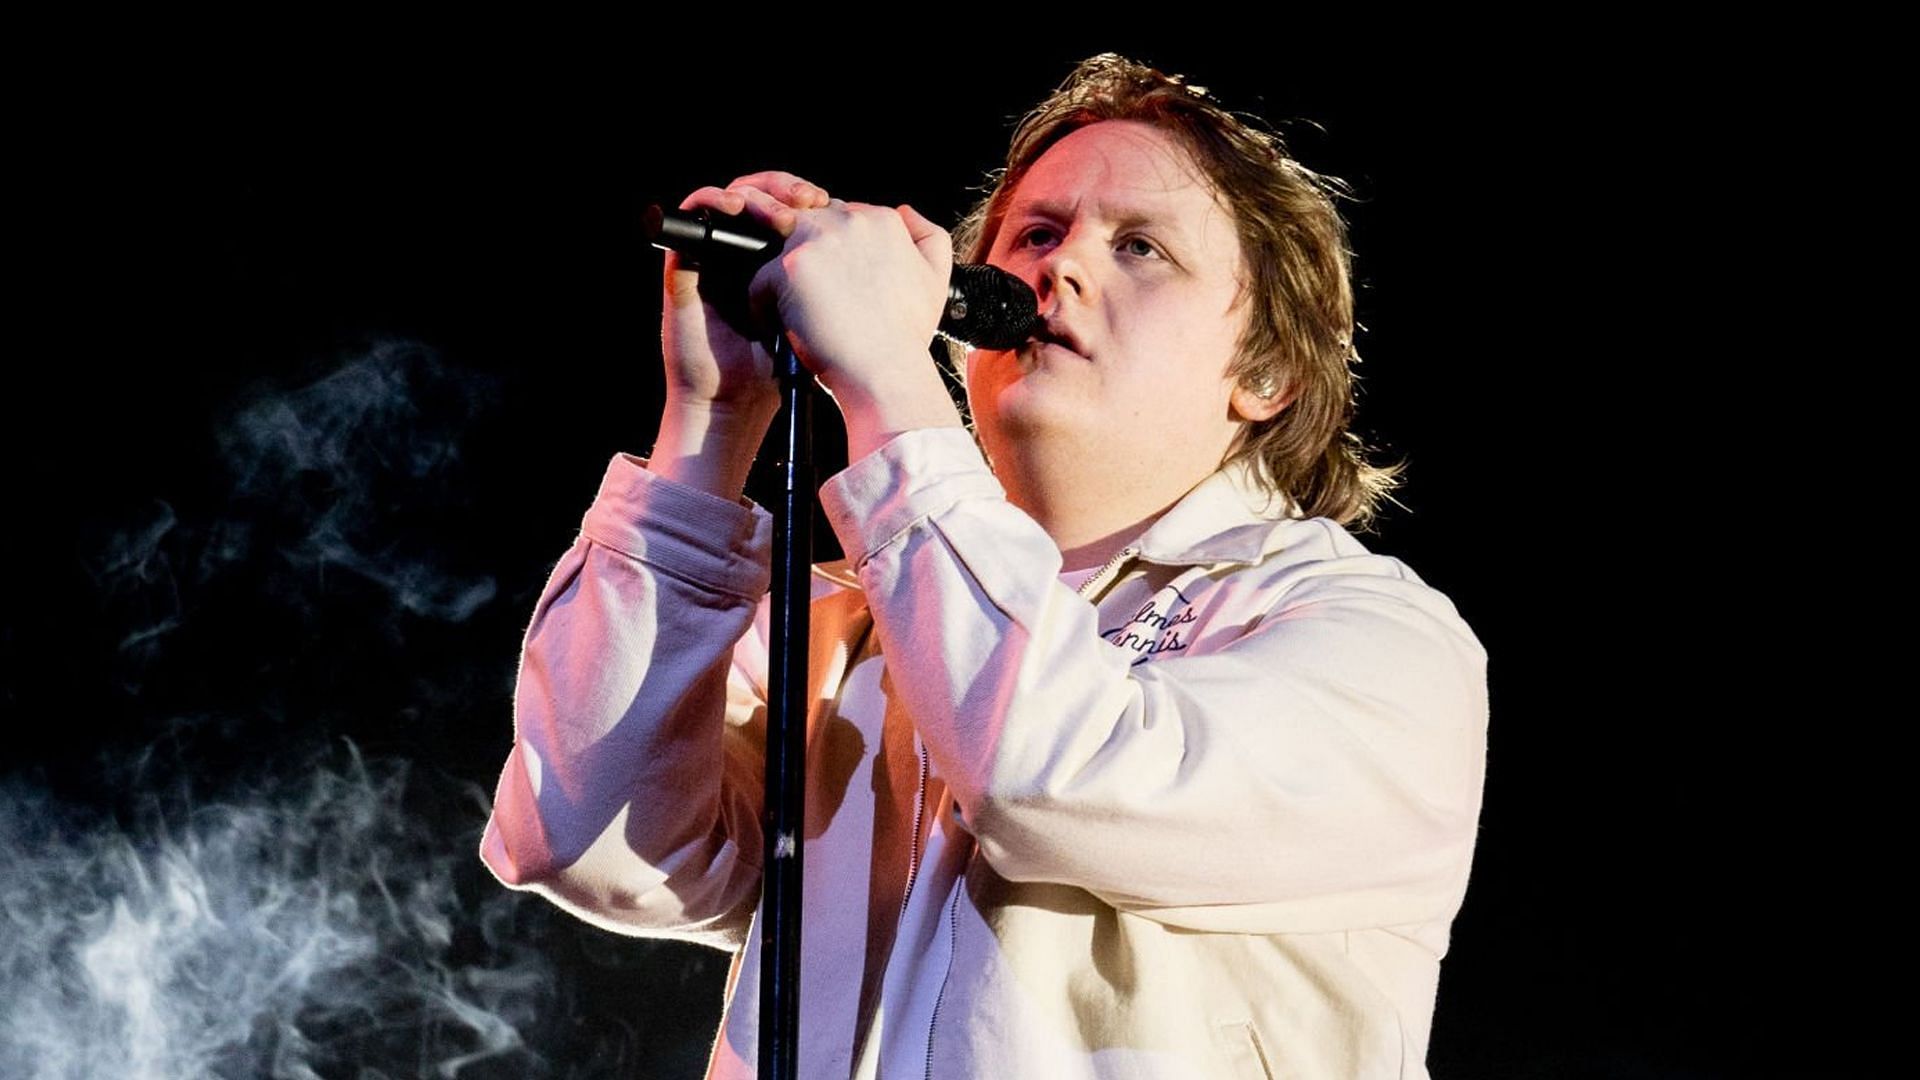 Lewis Capaldi at his Manchester concert (Image via Getty Images)